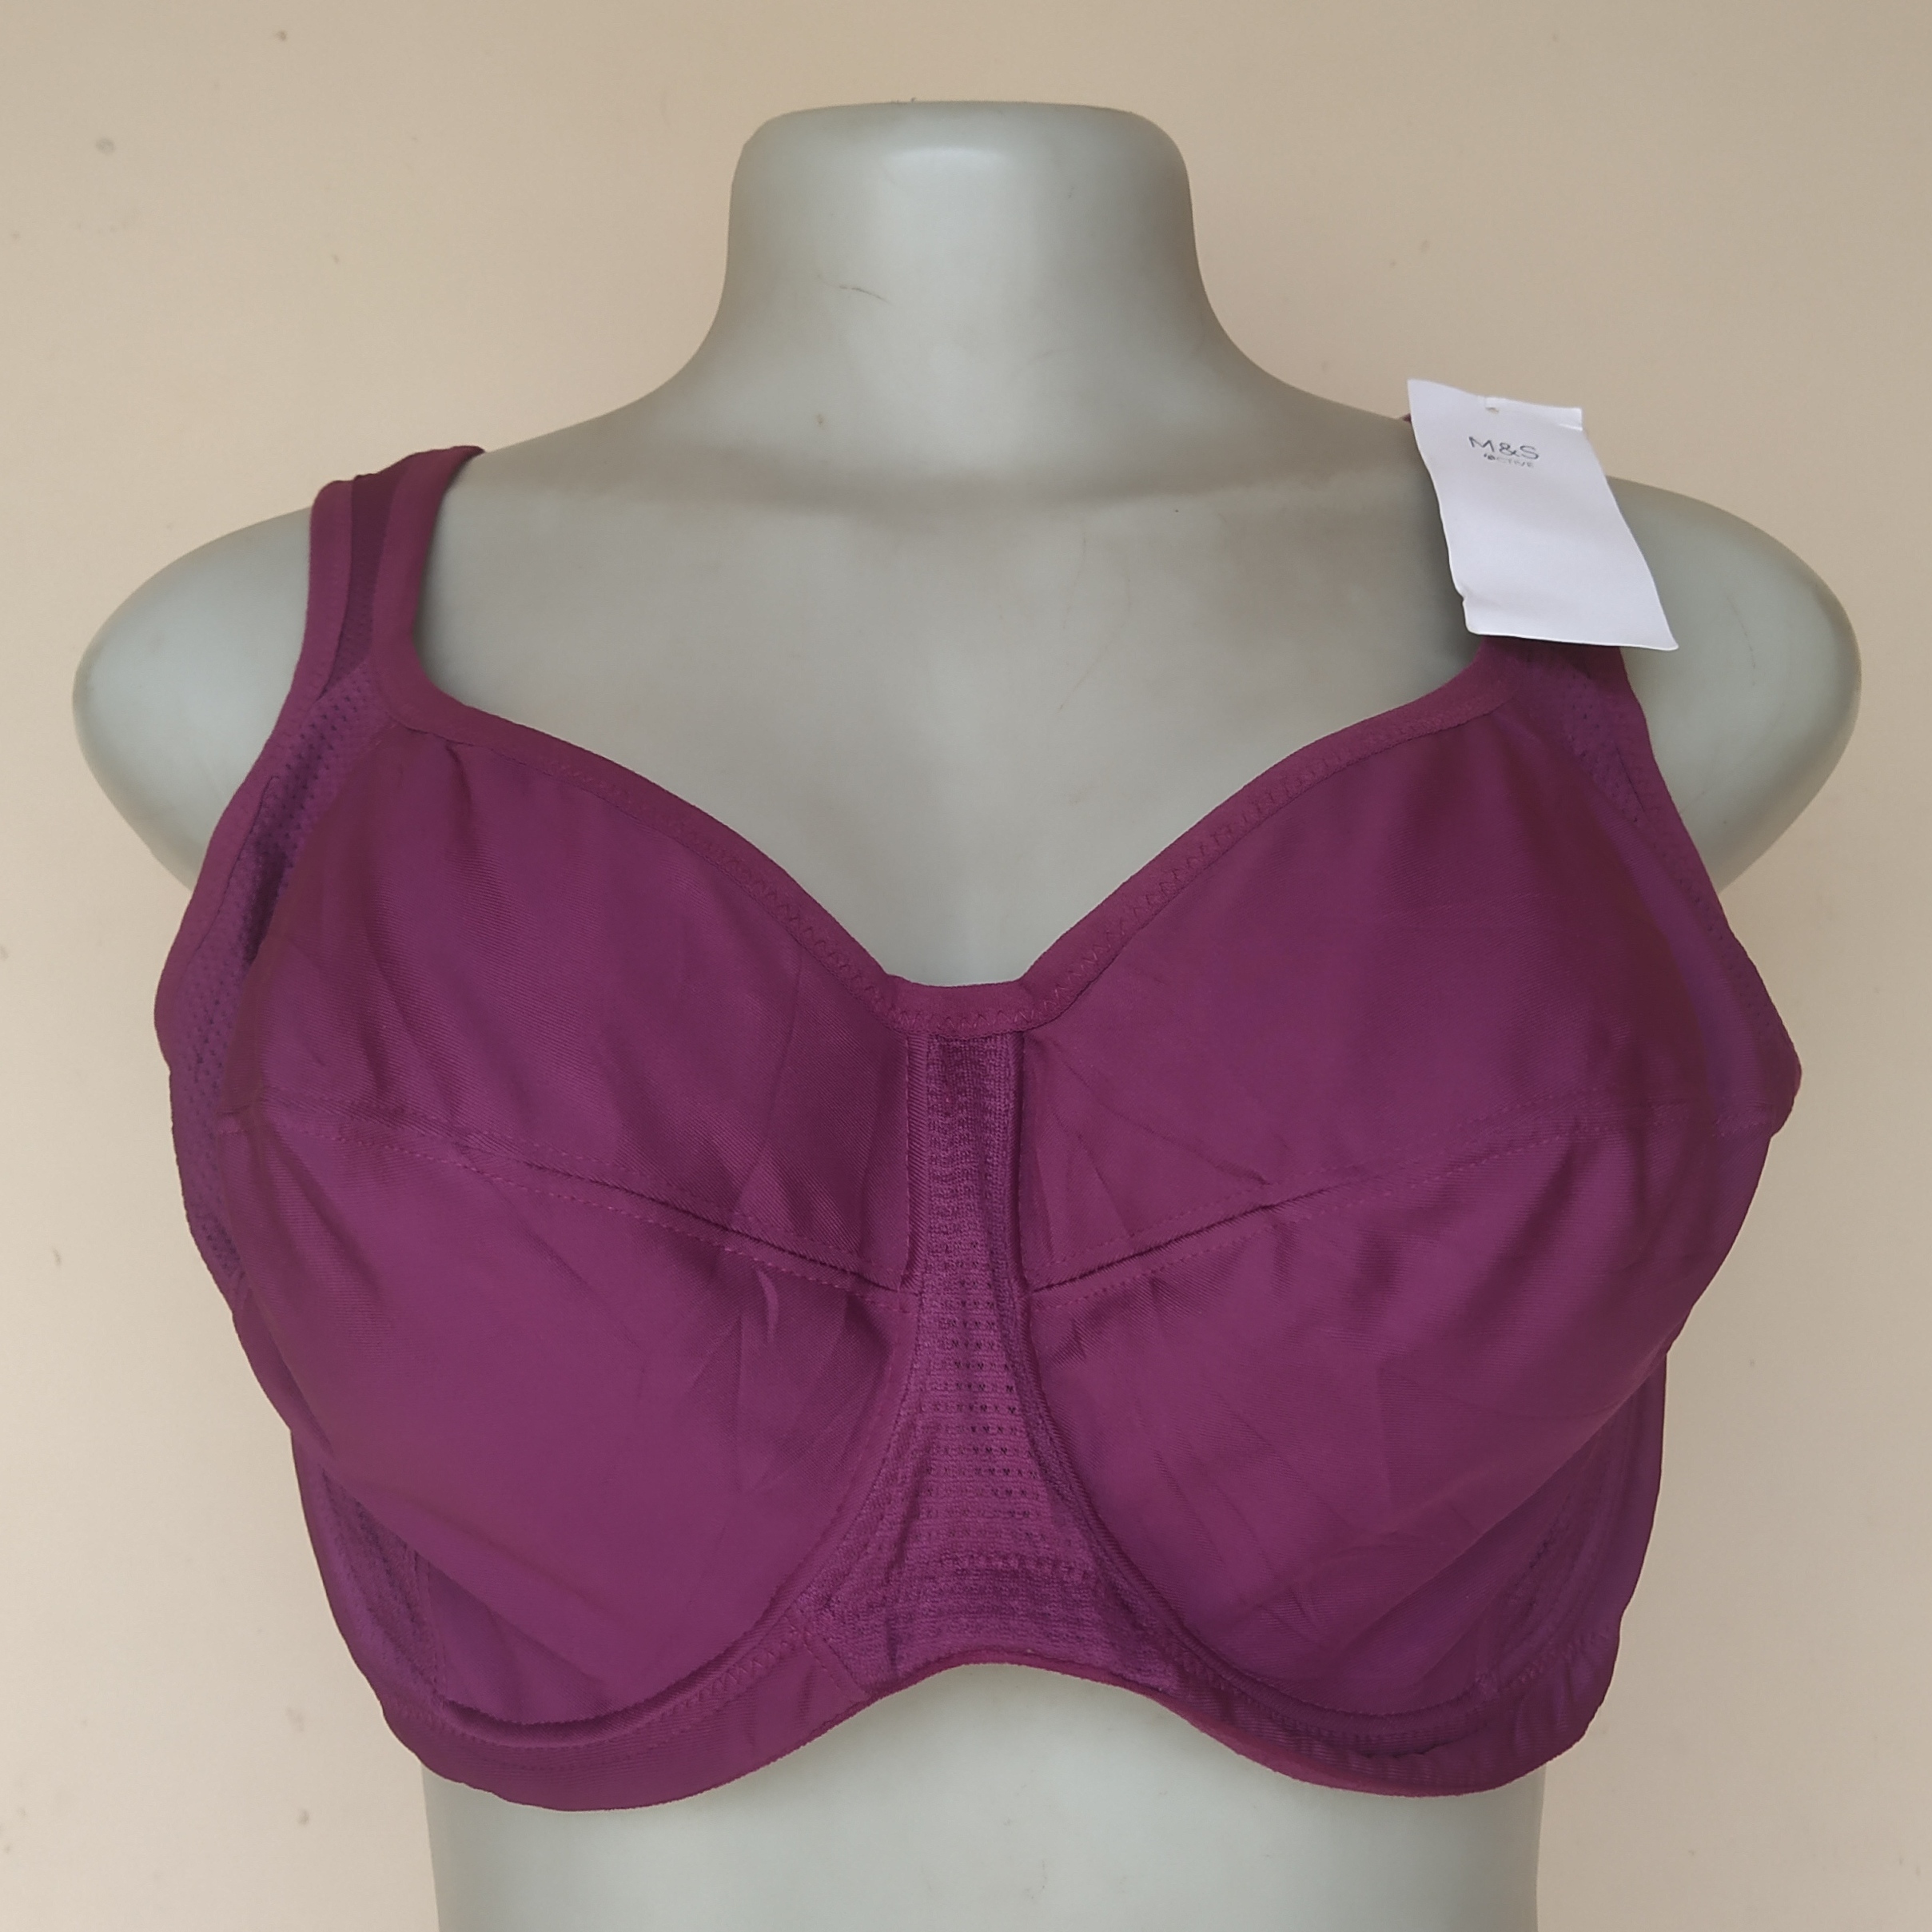 Unbranded Ladies Pink Padded Push-Up Underwire Bra Size 36 C ? (18)